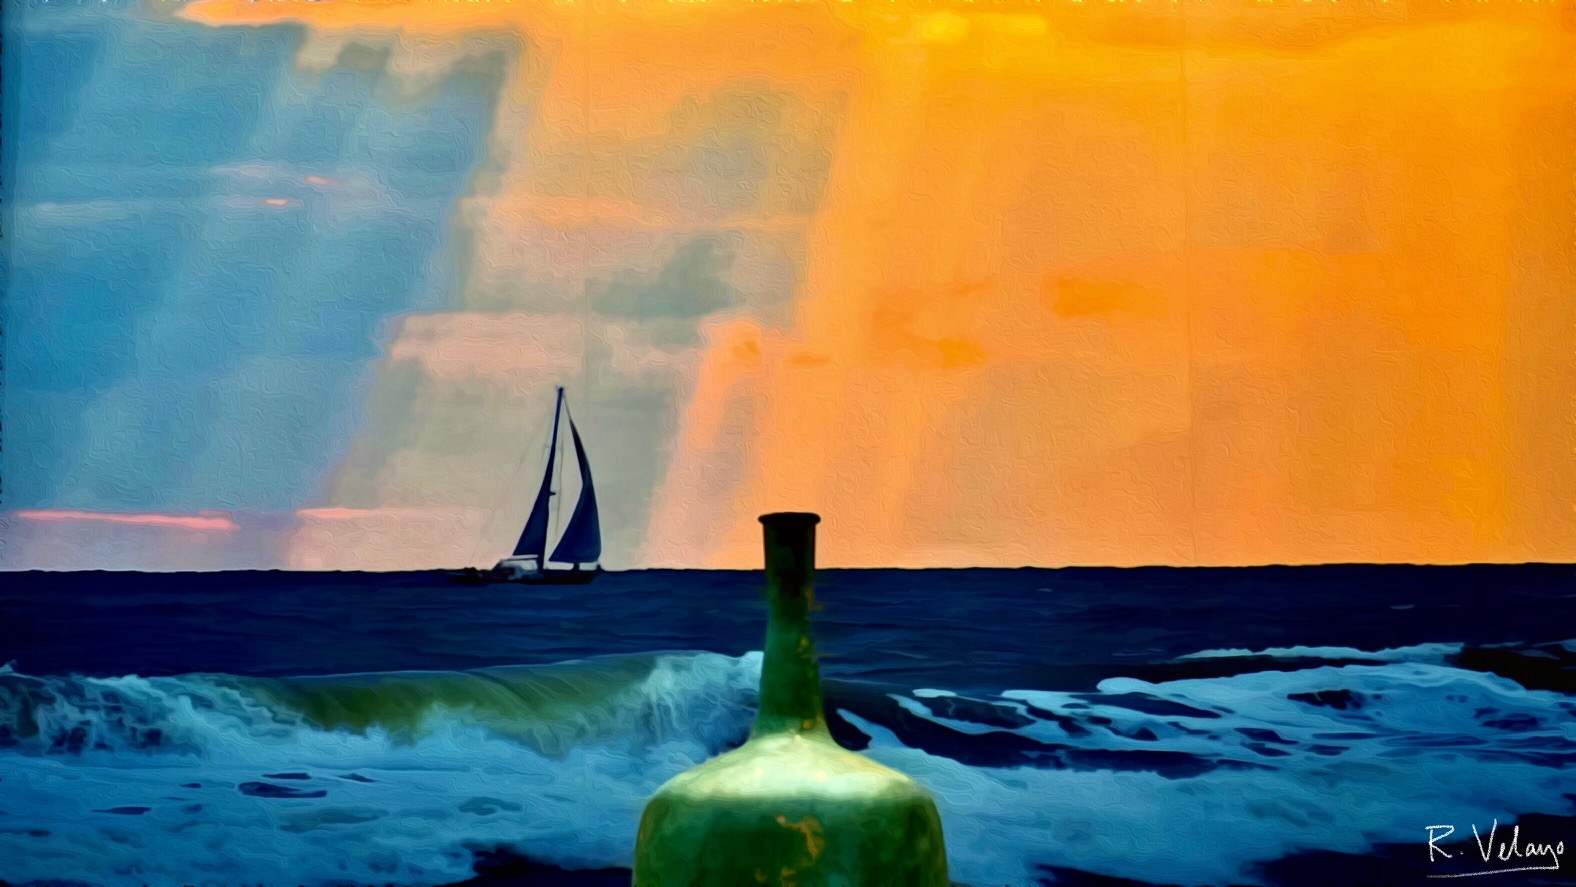 GREEN VASE WITH DUSK BY THE SEA AS BACKGROUND" [1/07/2022]